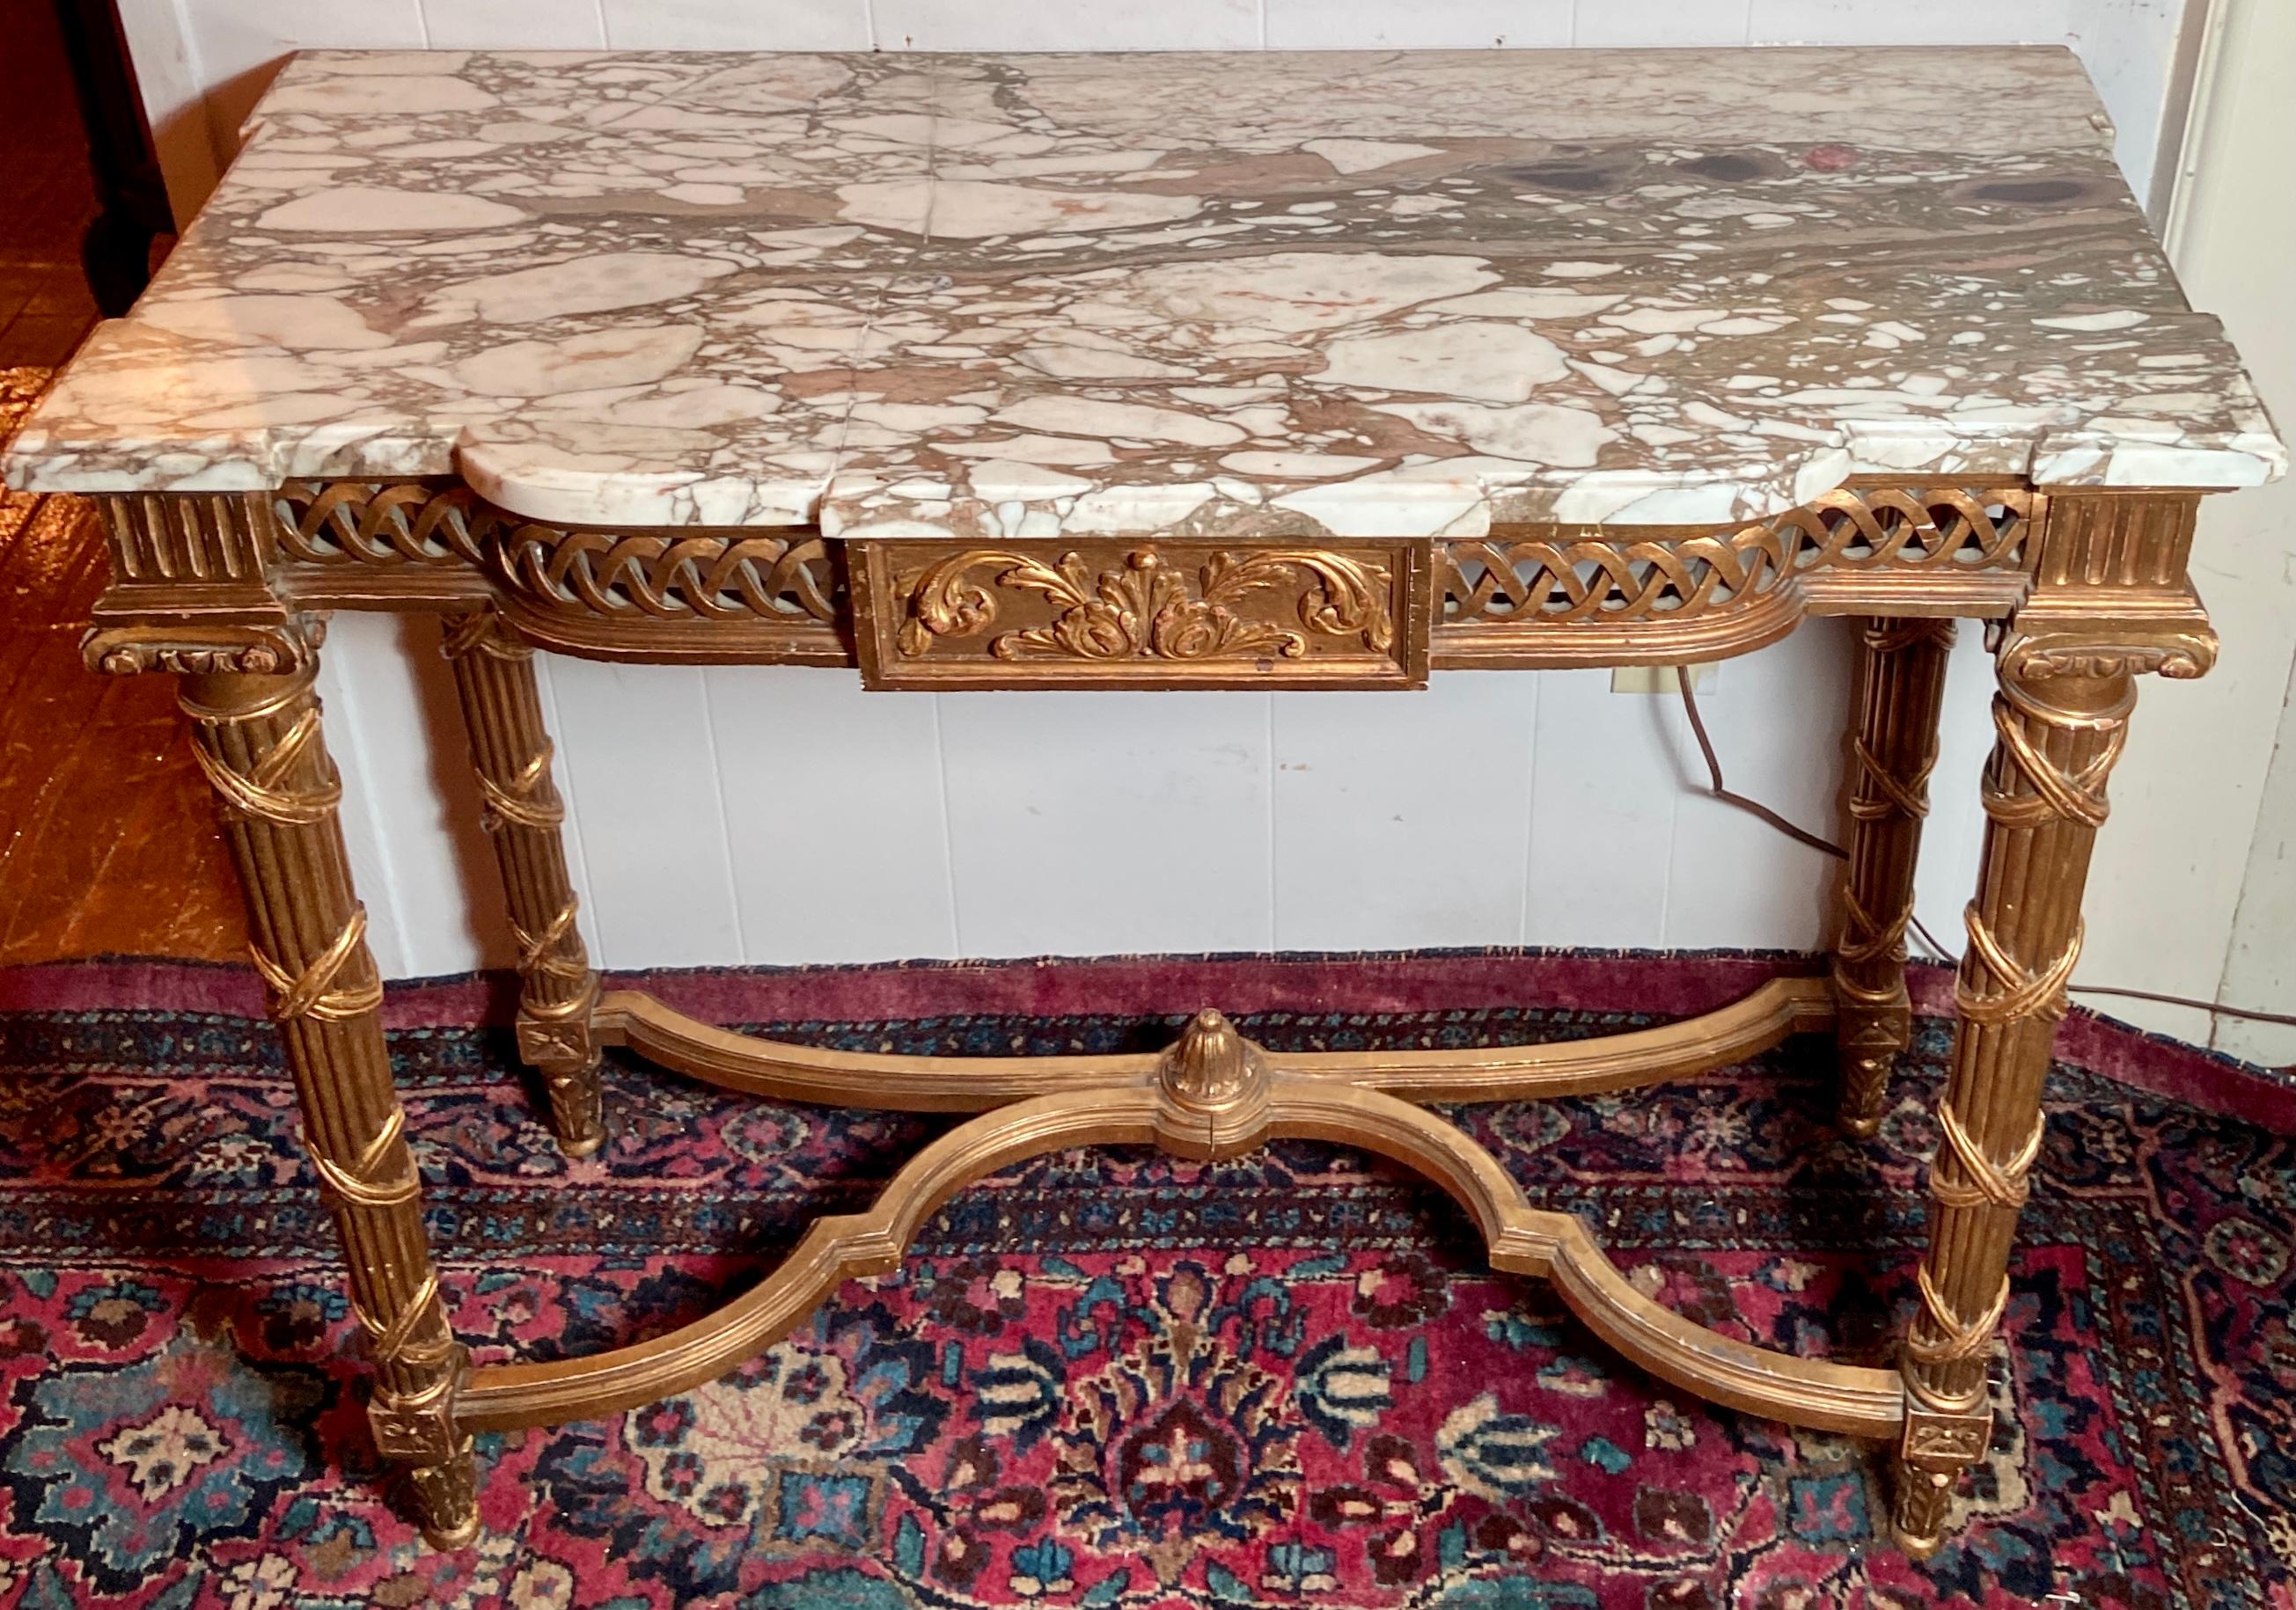 Antique French Louis XVI gilt wood and white & grey marble-top console, Circa 1880.
This console is typical of the fetching lines of the Louis XVI style and has a nicely mottled marble top.